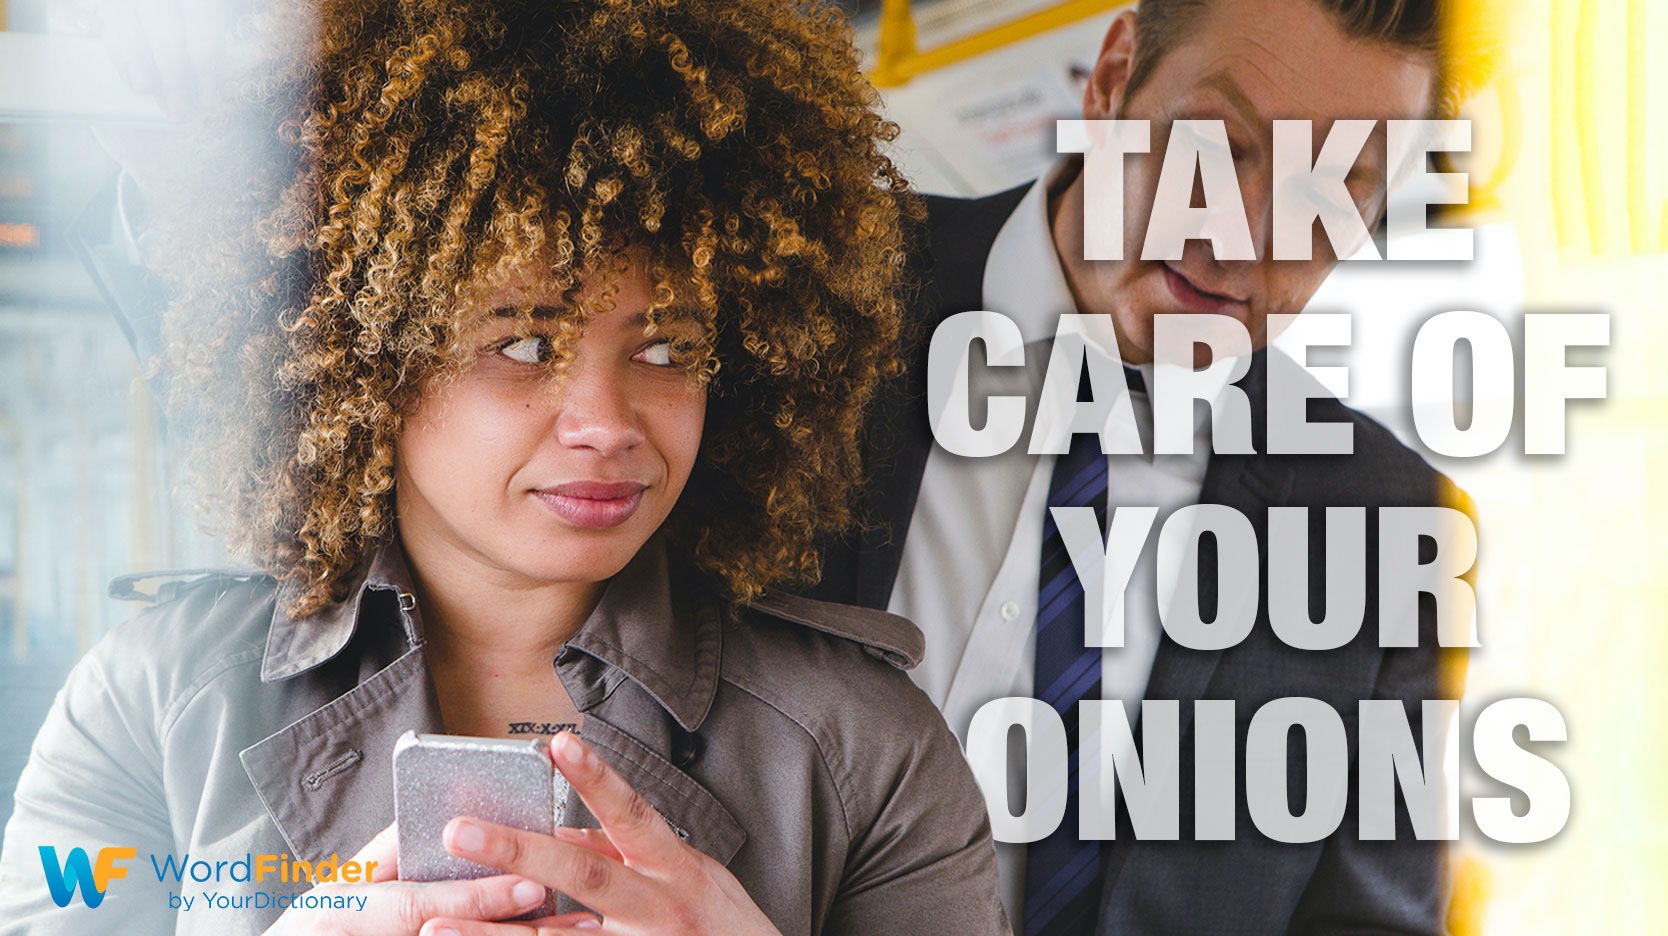 French take care of your onions man reading woman's text